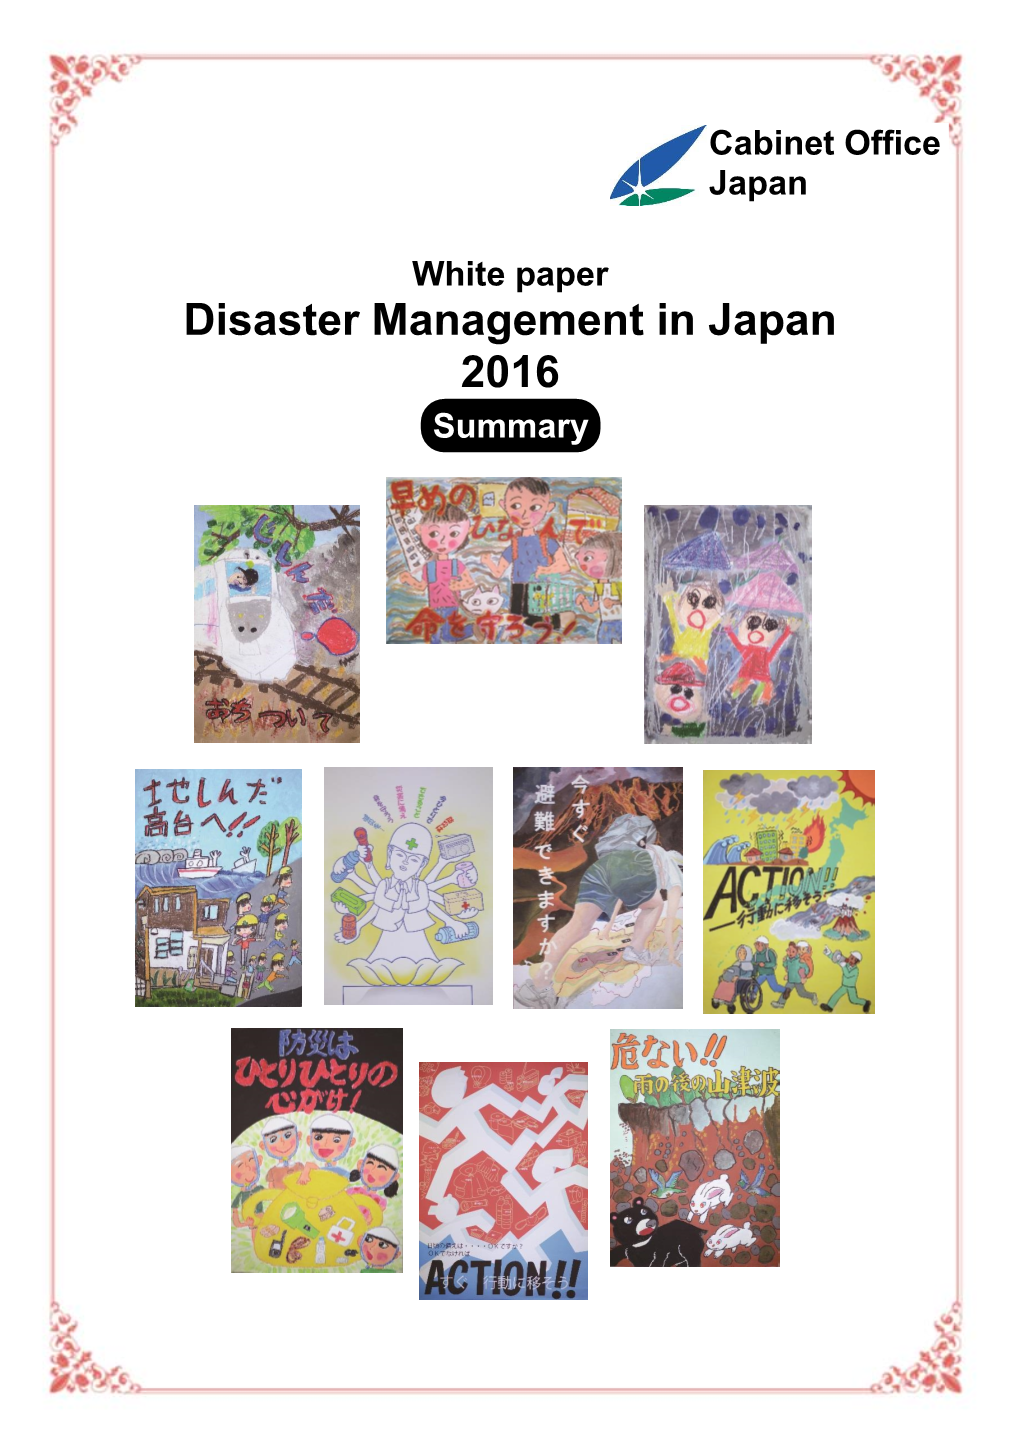 White Paper on Disaster Management 2016 Summary